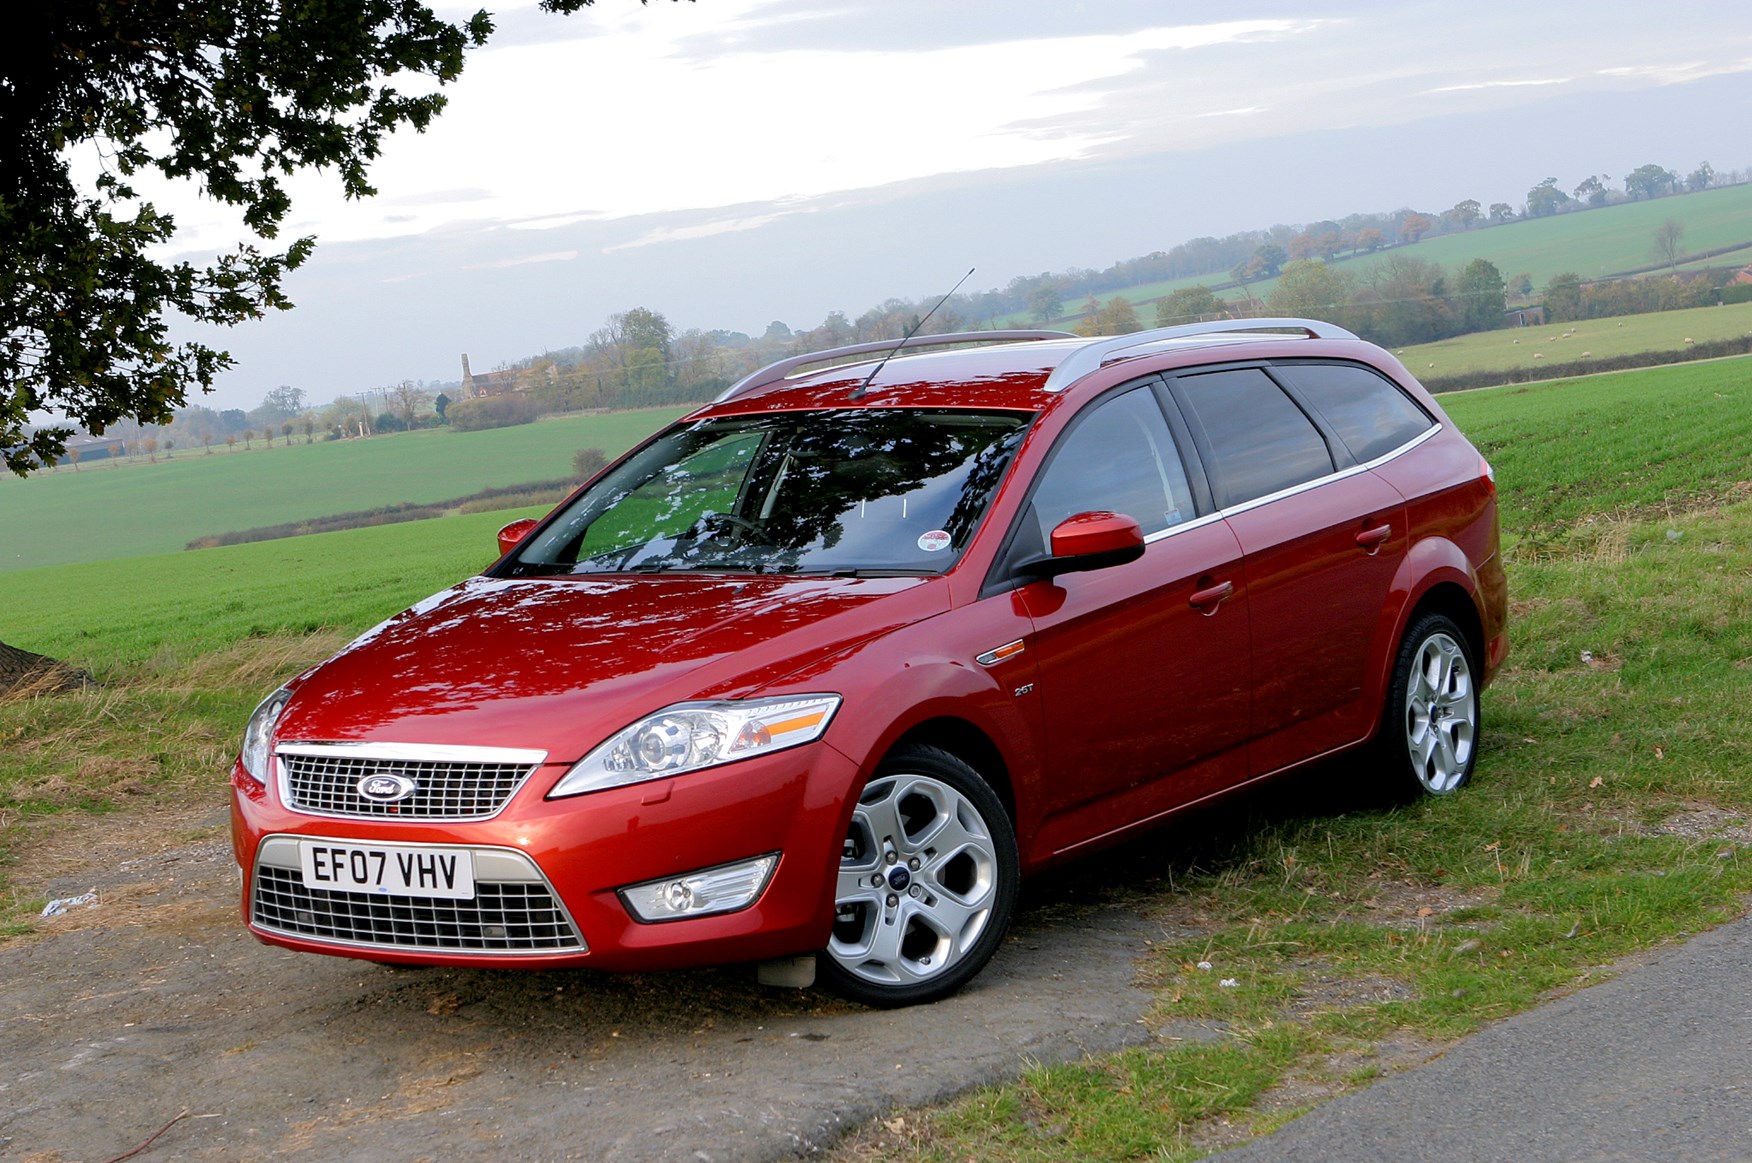 Used Ford Mondeo Estate (2007 - 2014) Review | Parkers